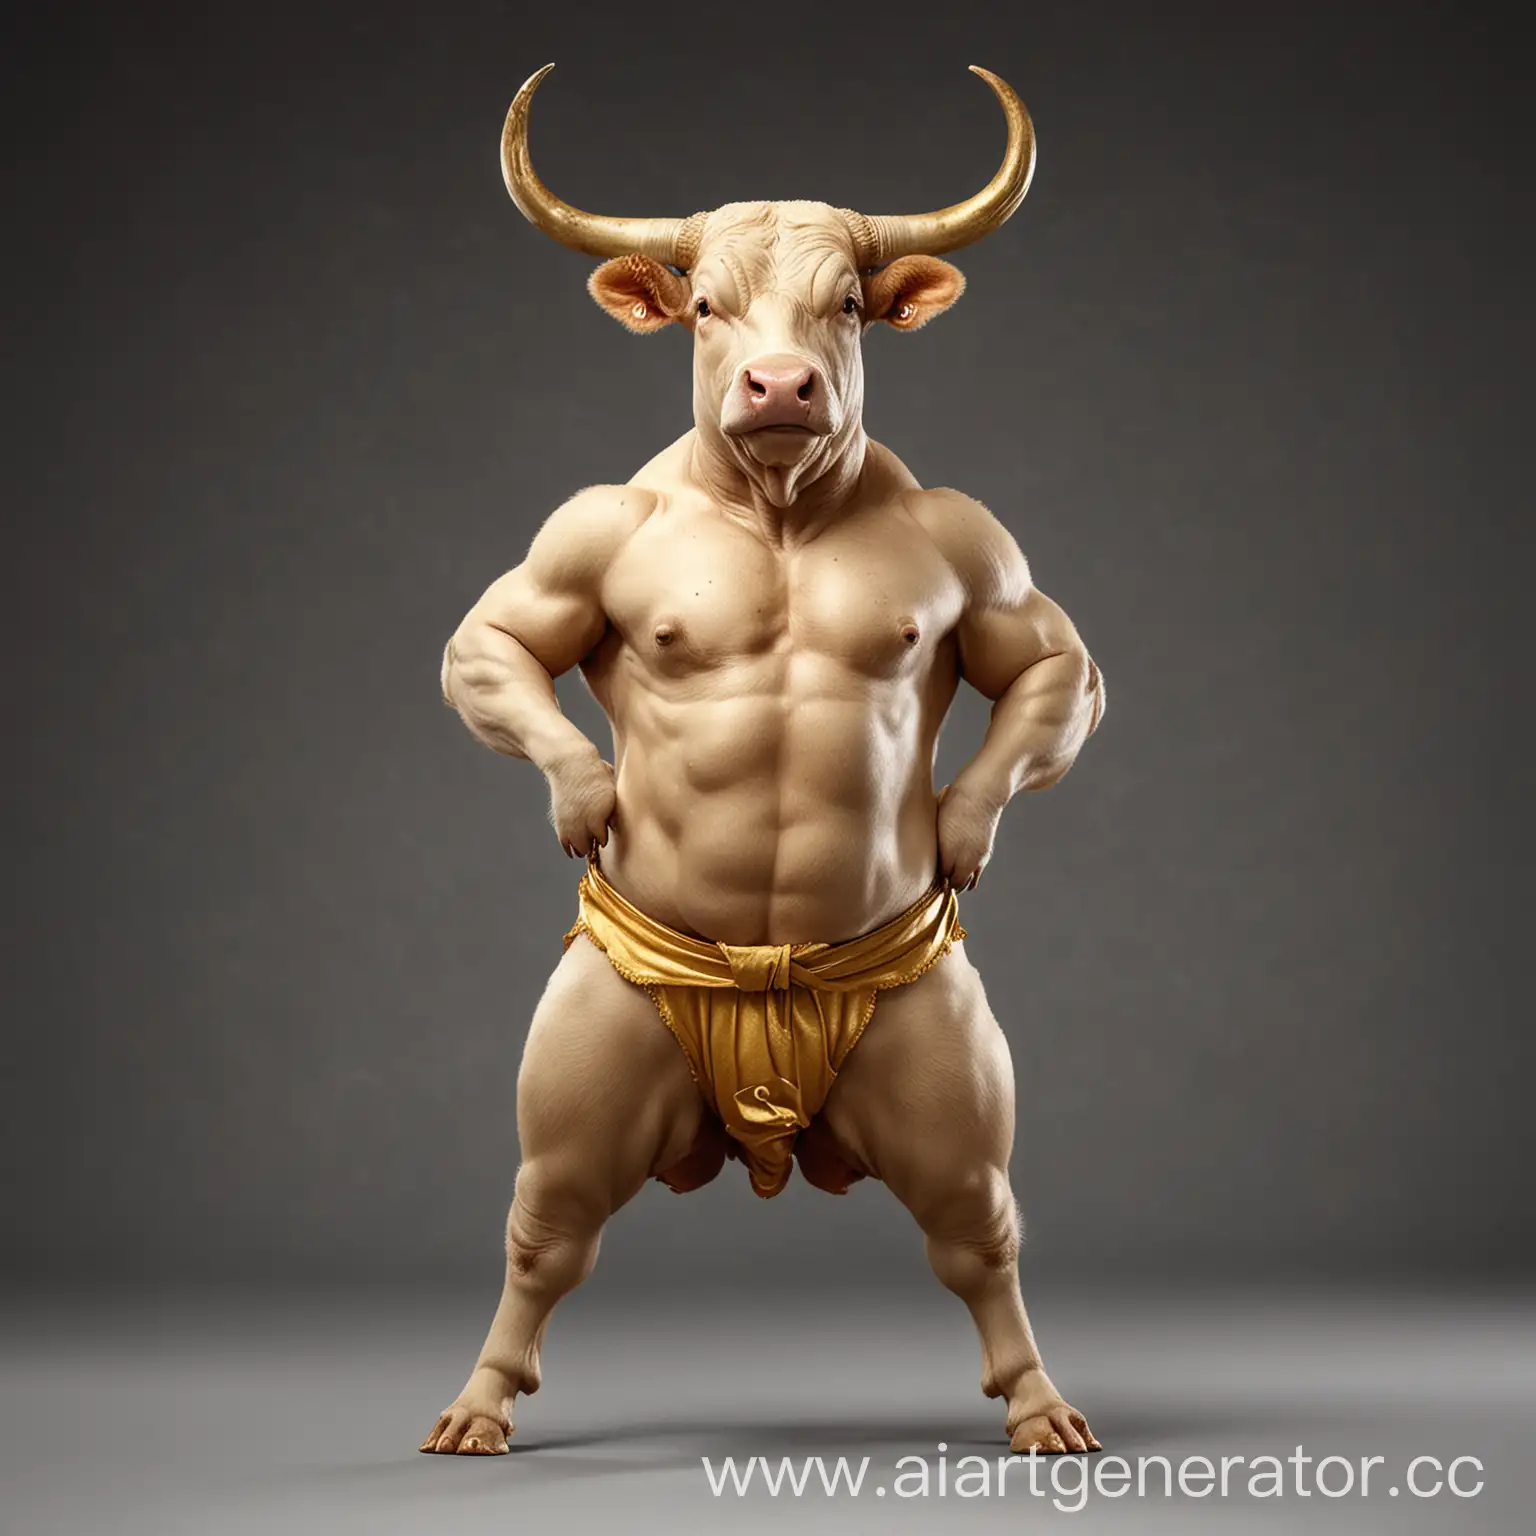 Majestic-Bull-Poses-Proudly-with-Golden-Eggs